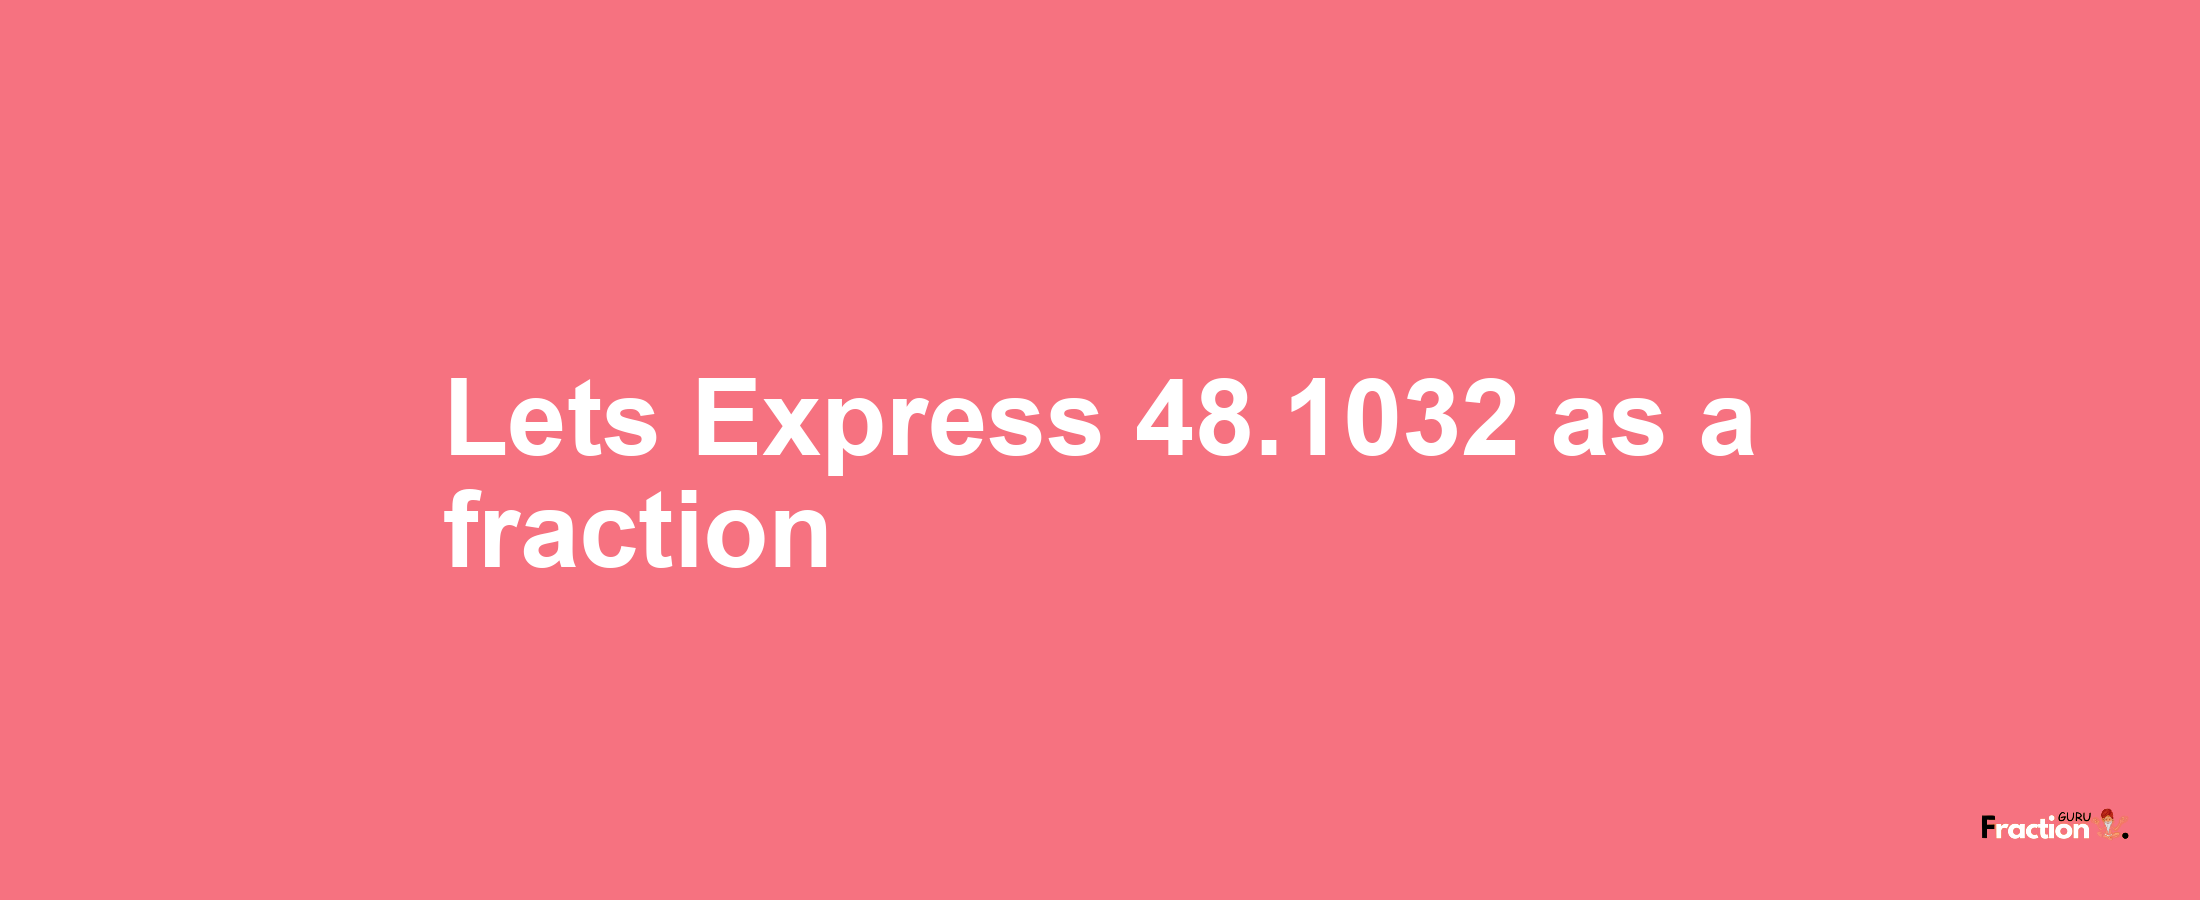 Lets Express 48.1032 as afraction